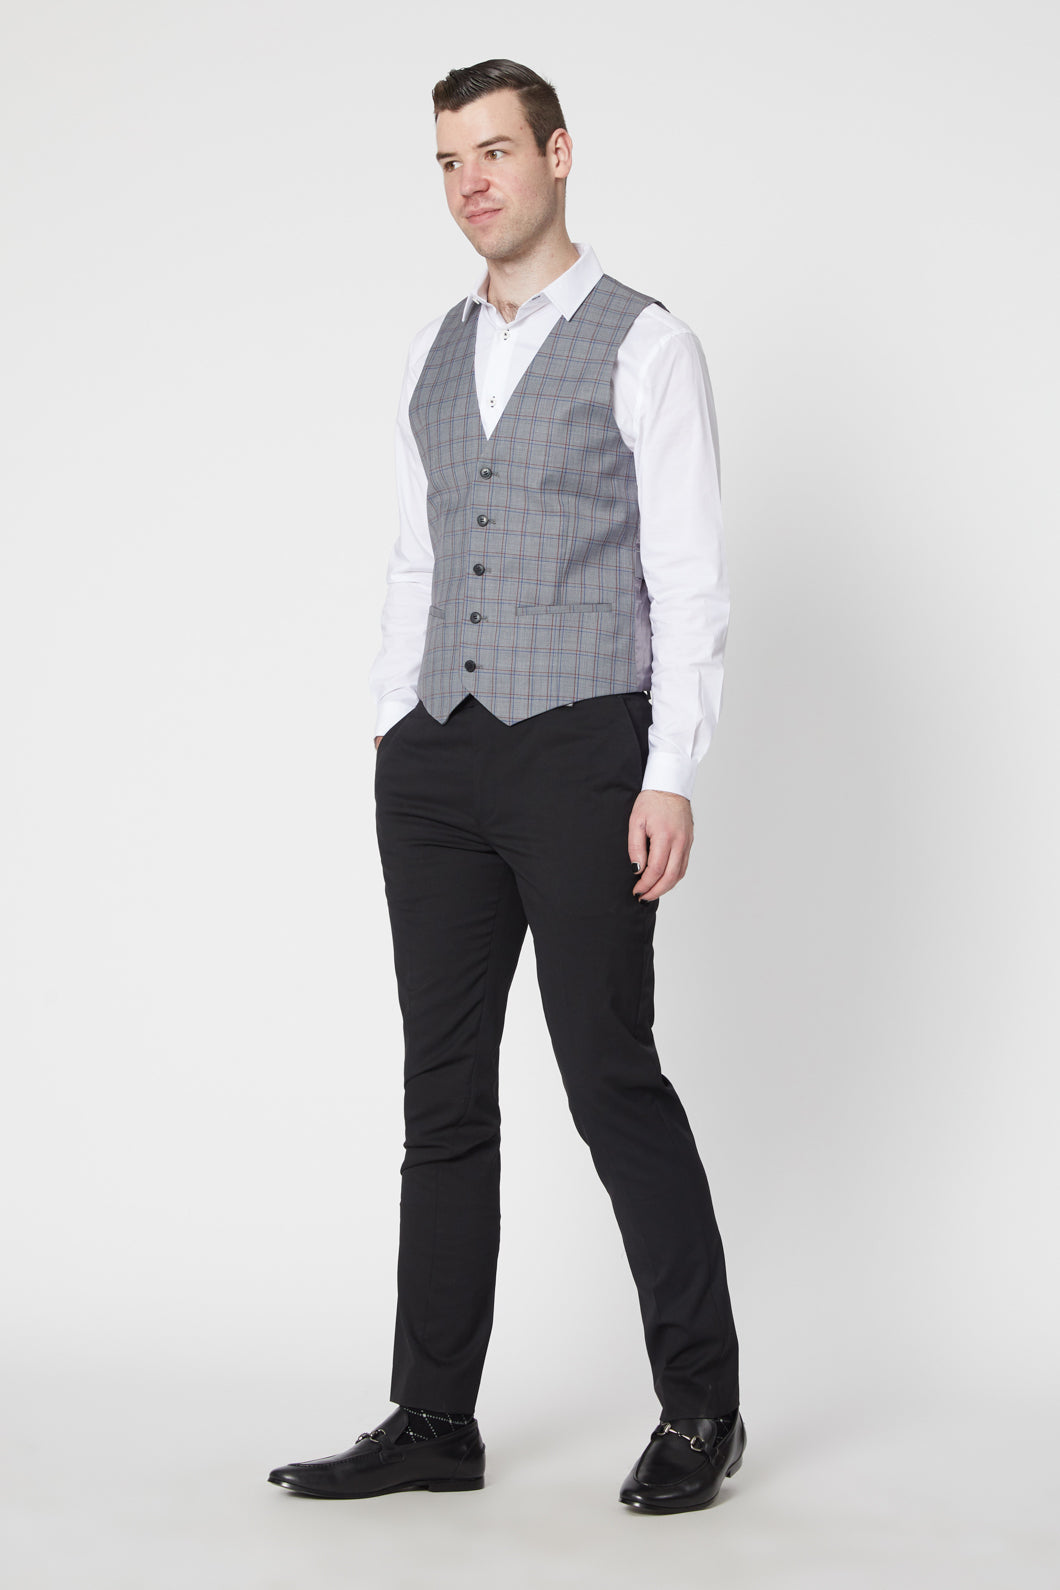 WAIST COATTROUSER GREY COLOR WITH WHITE SHIRT AND MATCHING TIE